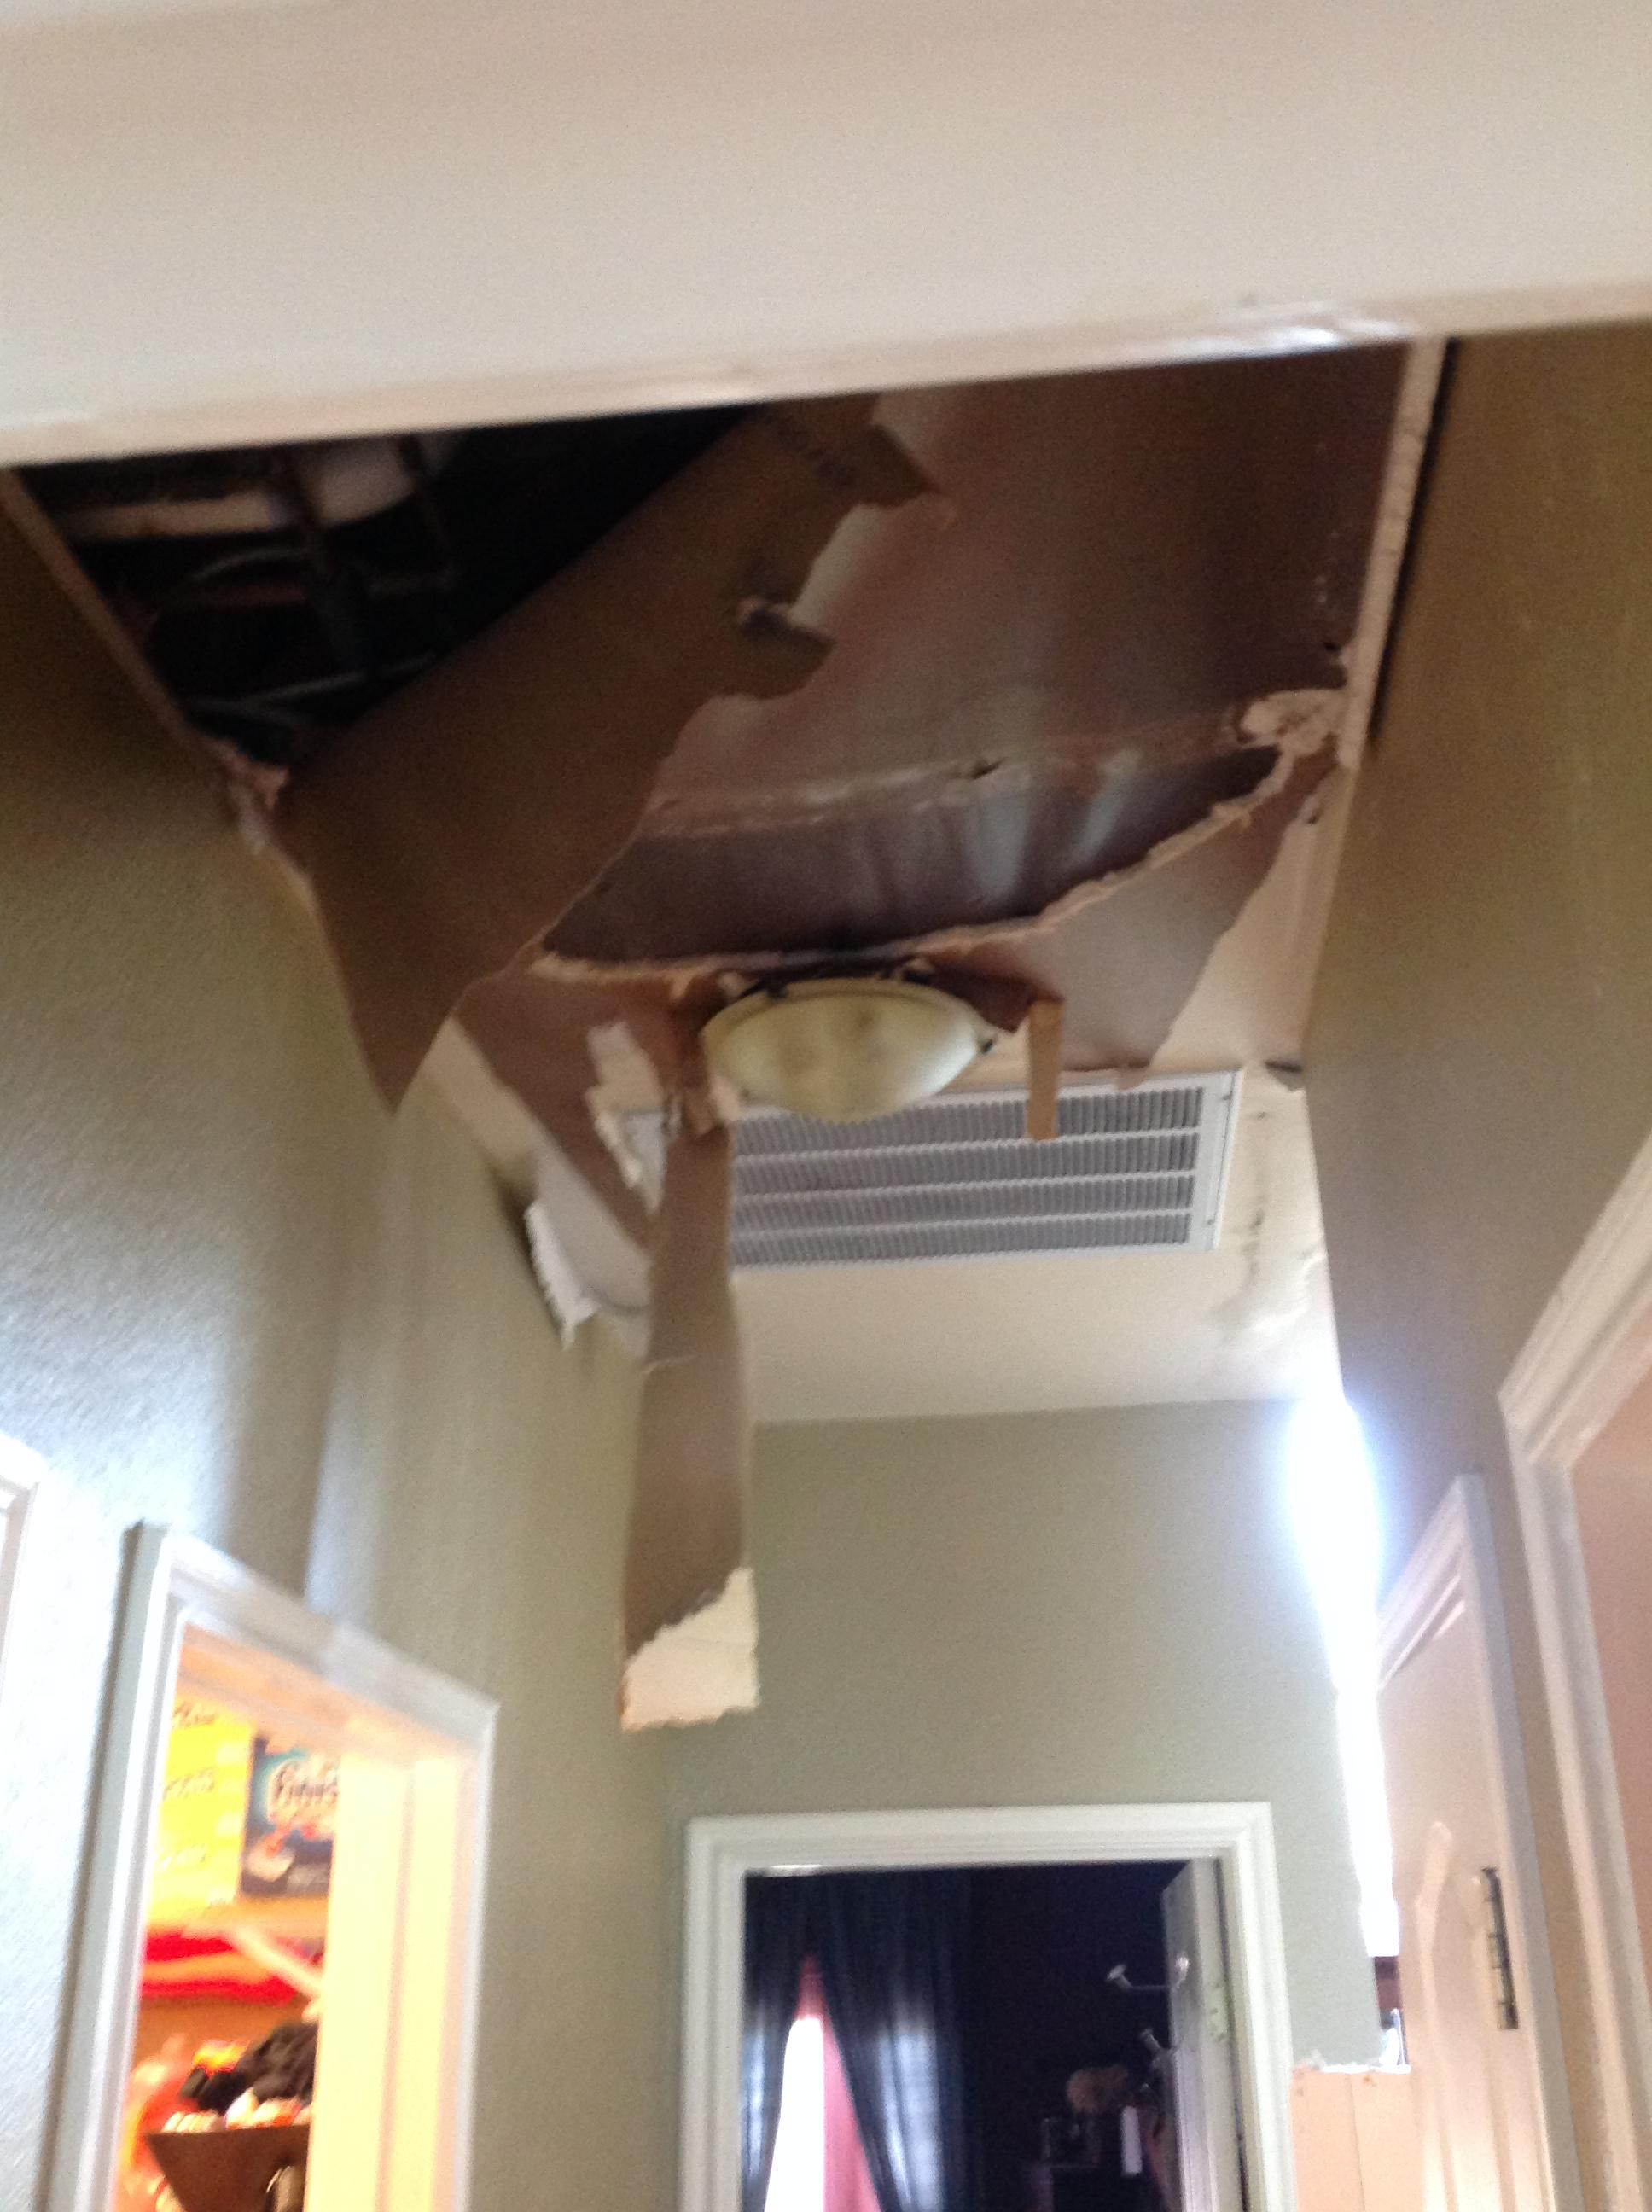 Severe ceiling damage after a large water loss in a home. SERVPRO is Faster to Any Size Disaster.